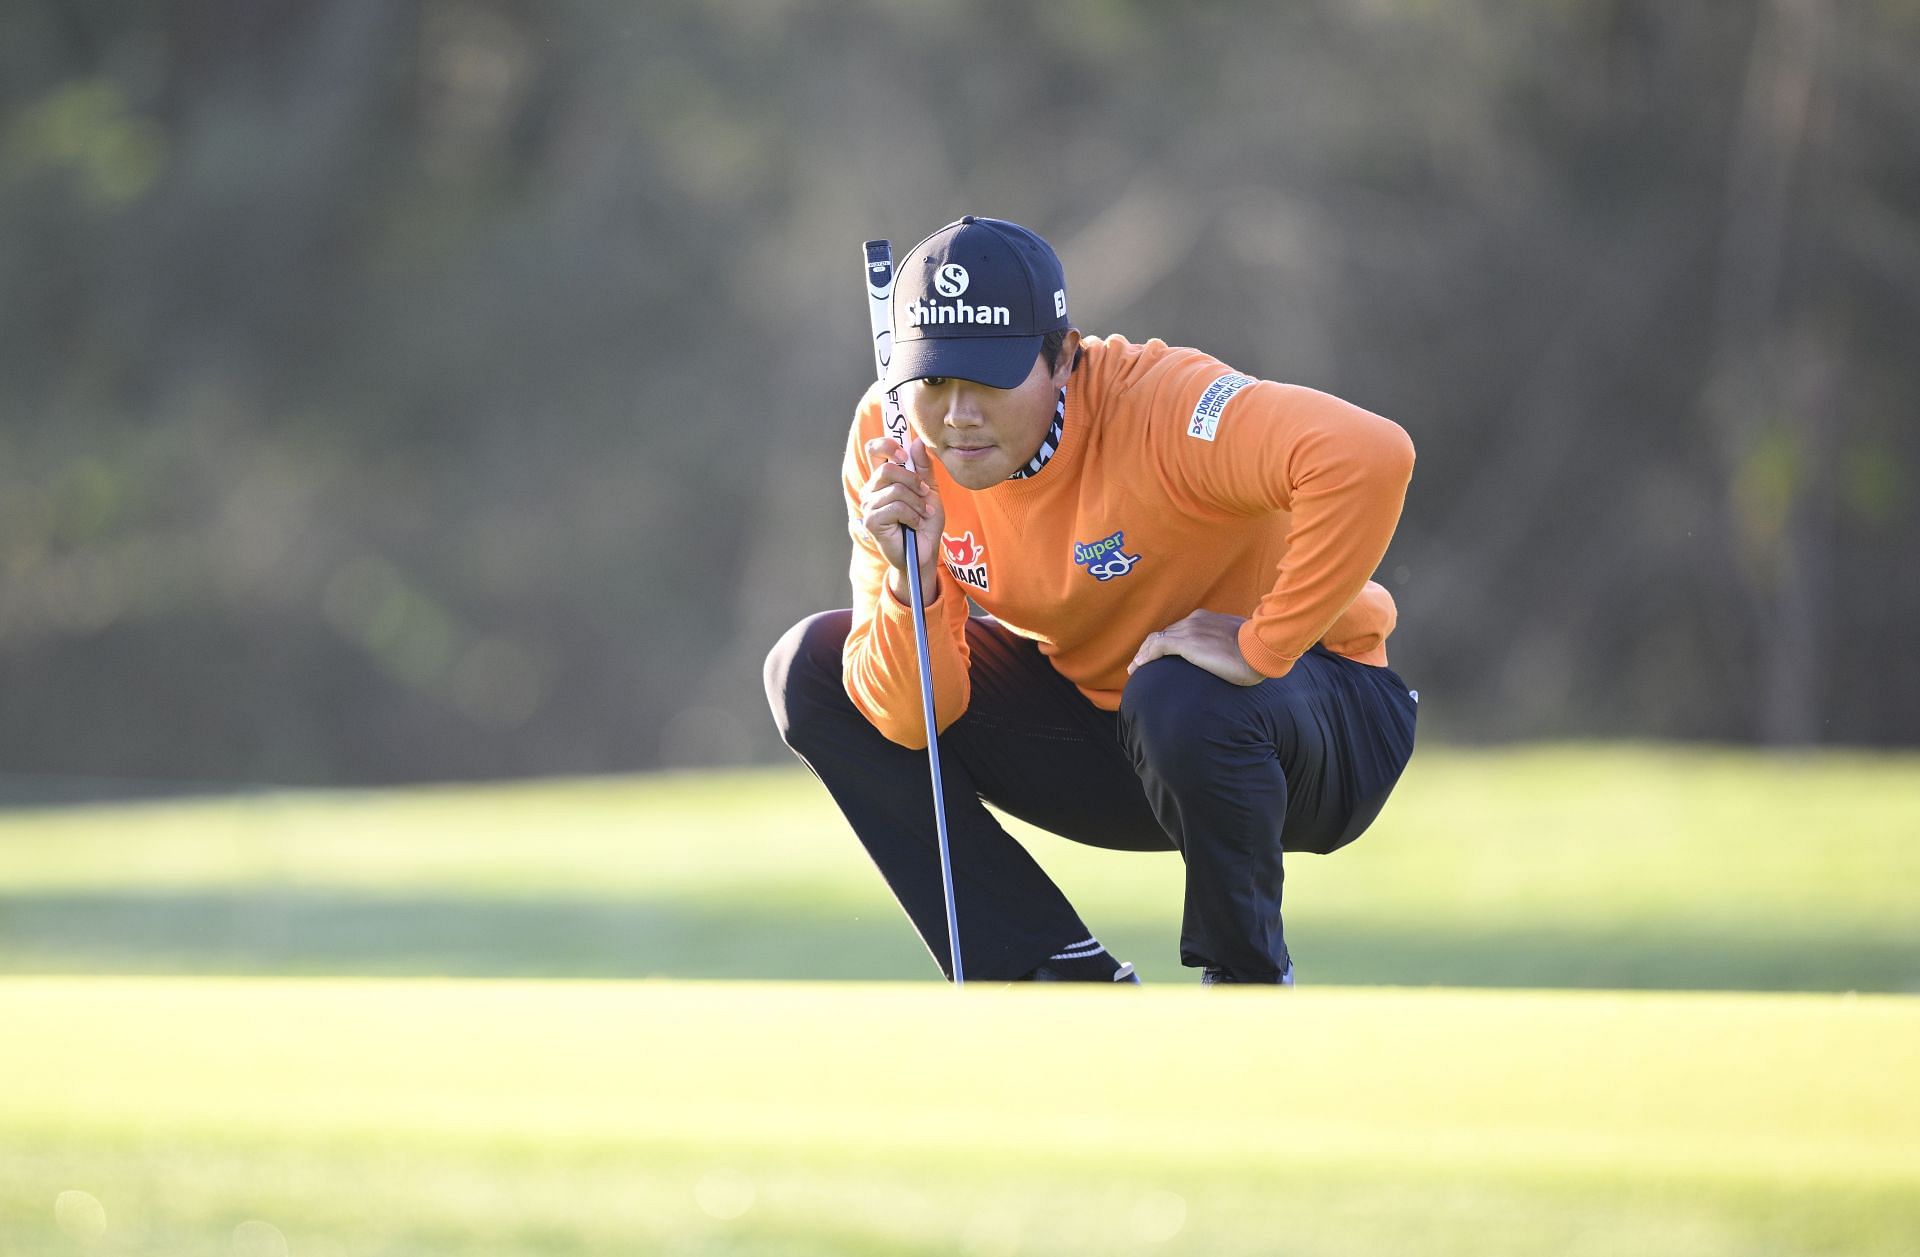 S.H. Kim shares the joint lead at the Cognizant Classic after the first day